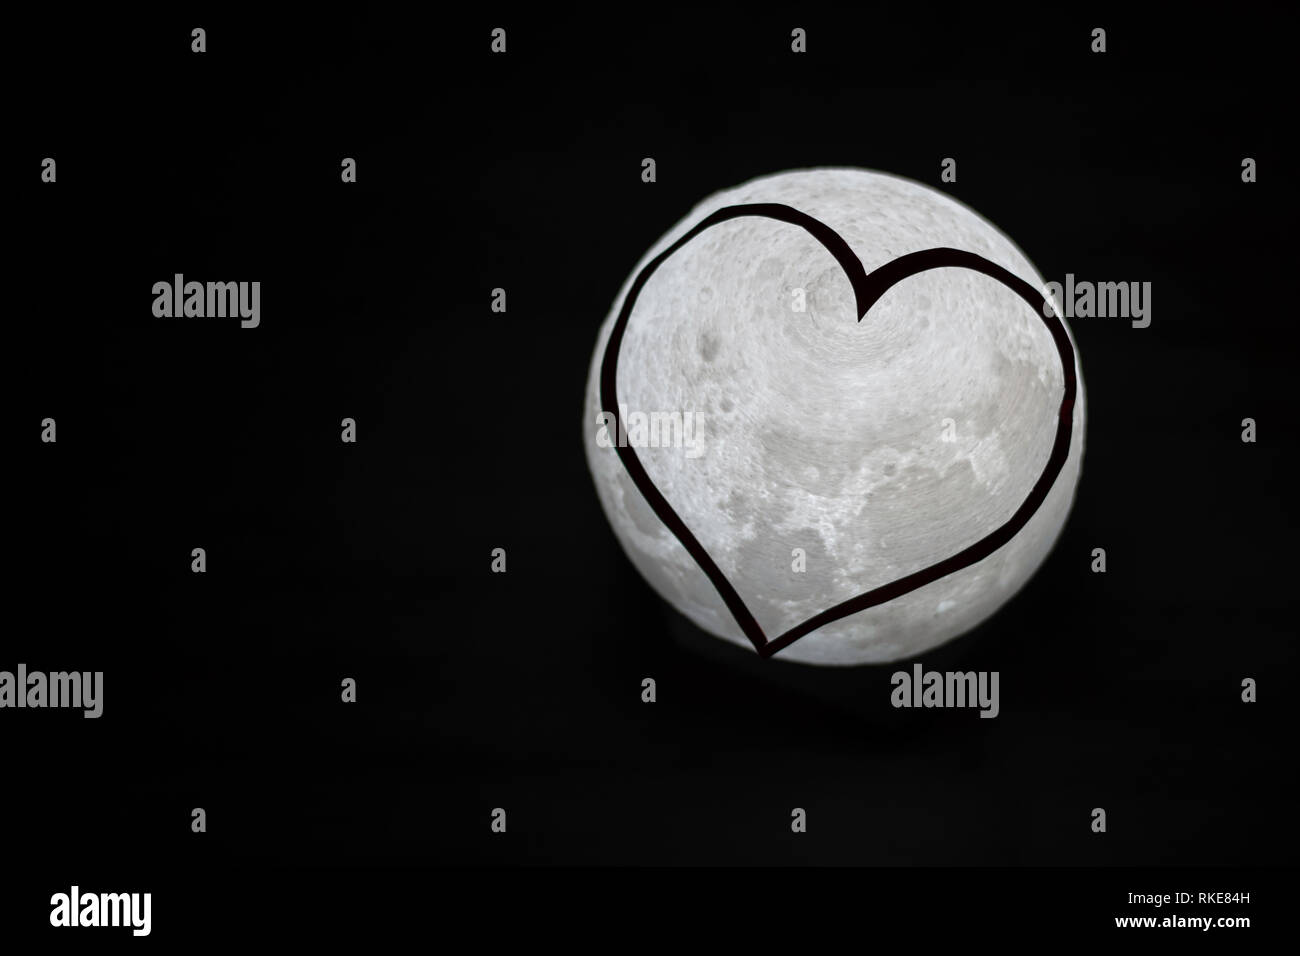 Black and white photo of small moon light with heart countor shape in front Stock Photo